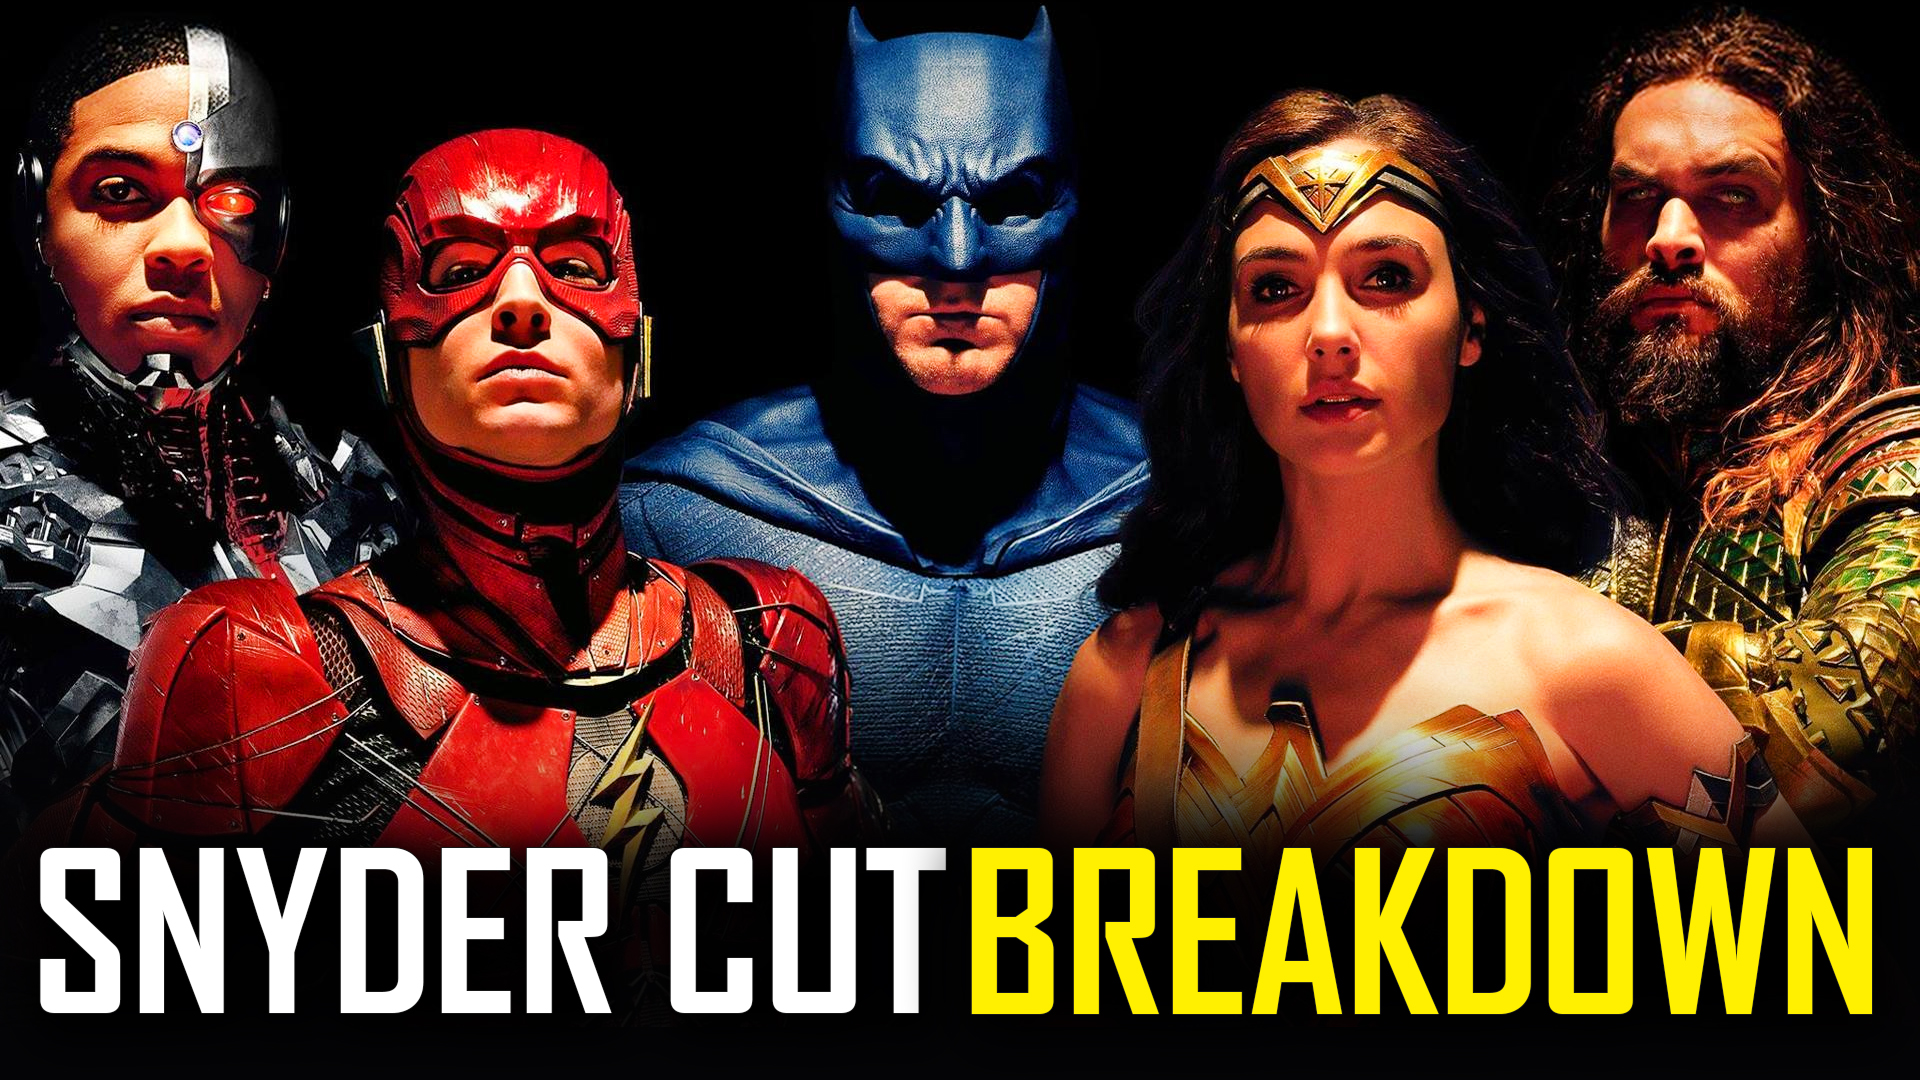 justice league snyder cut breakdown update everything we know so far deleted scenes changes ending explained spoilers full movie zack snyder interview 4k